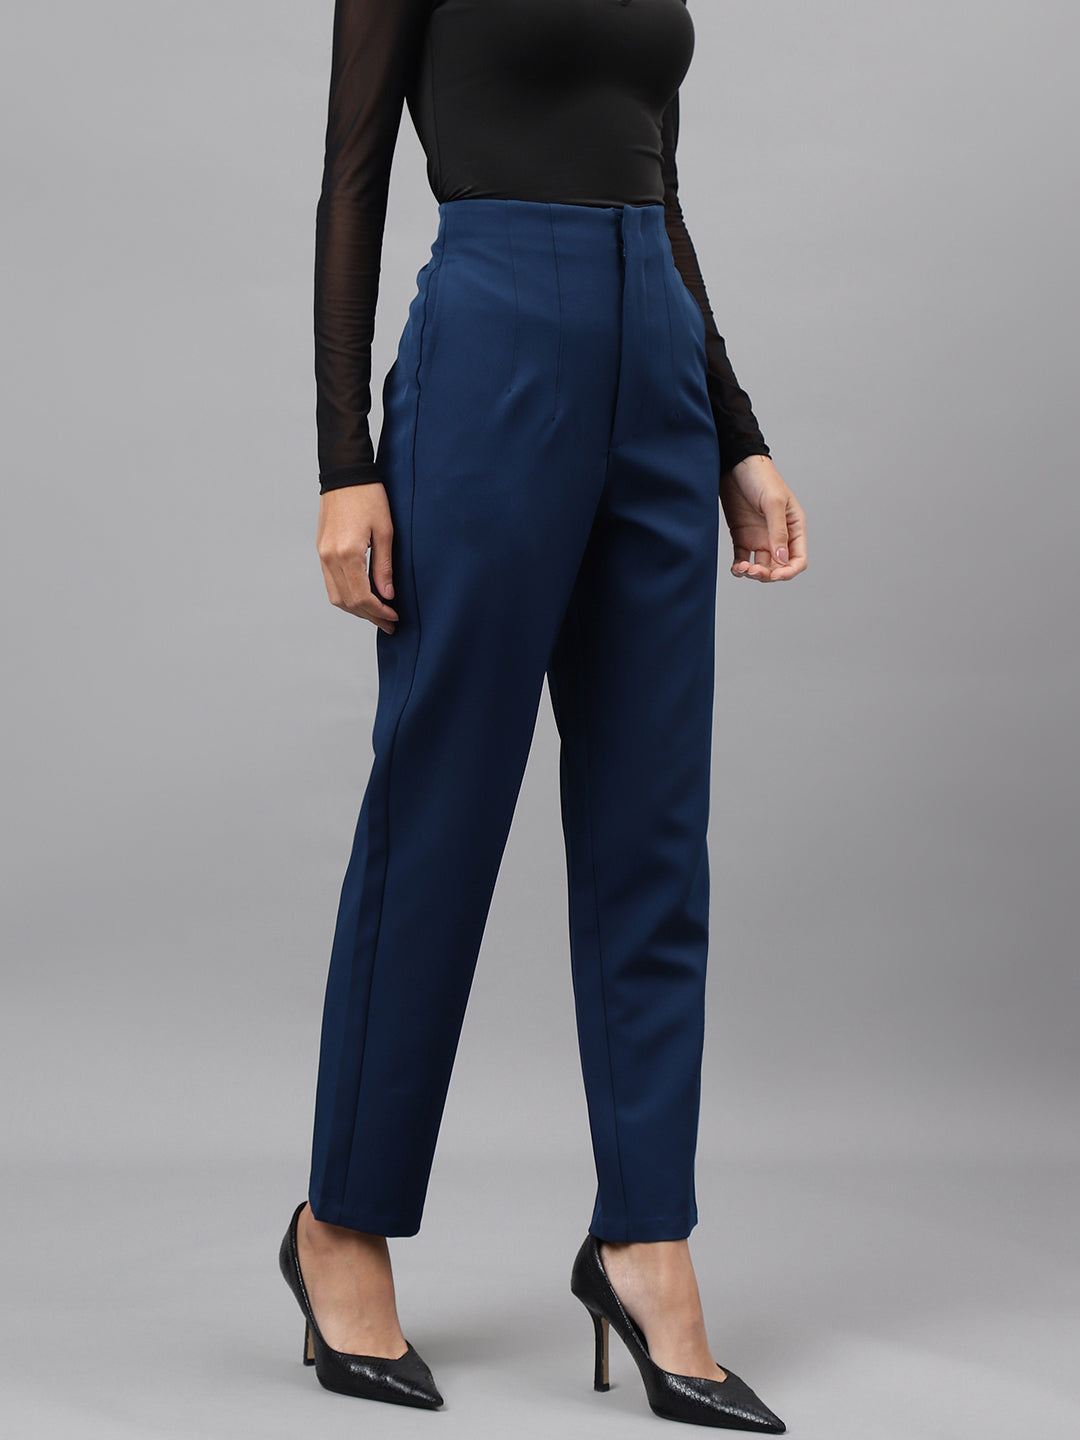 Teal Solid Straight Pant